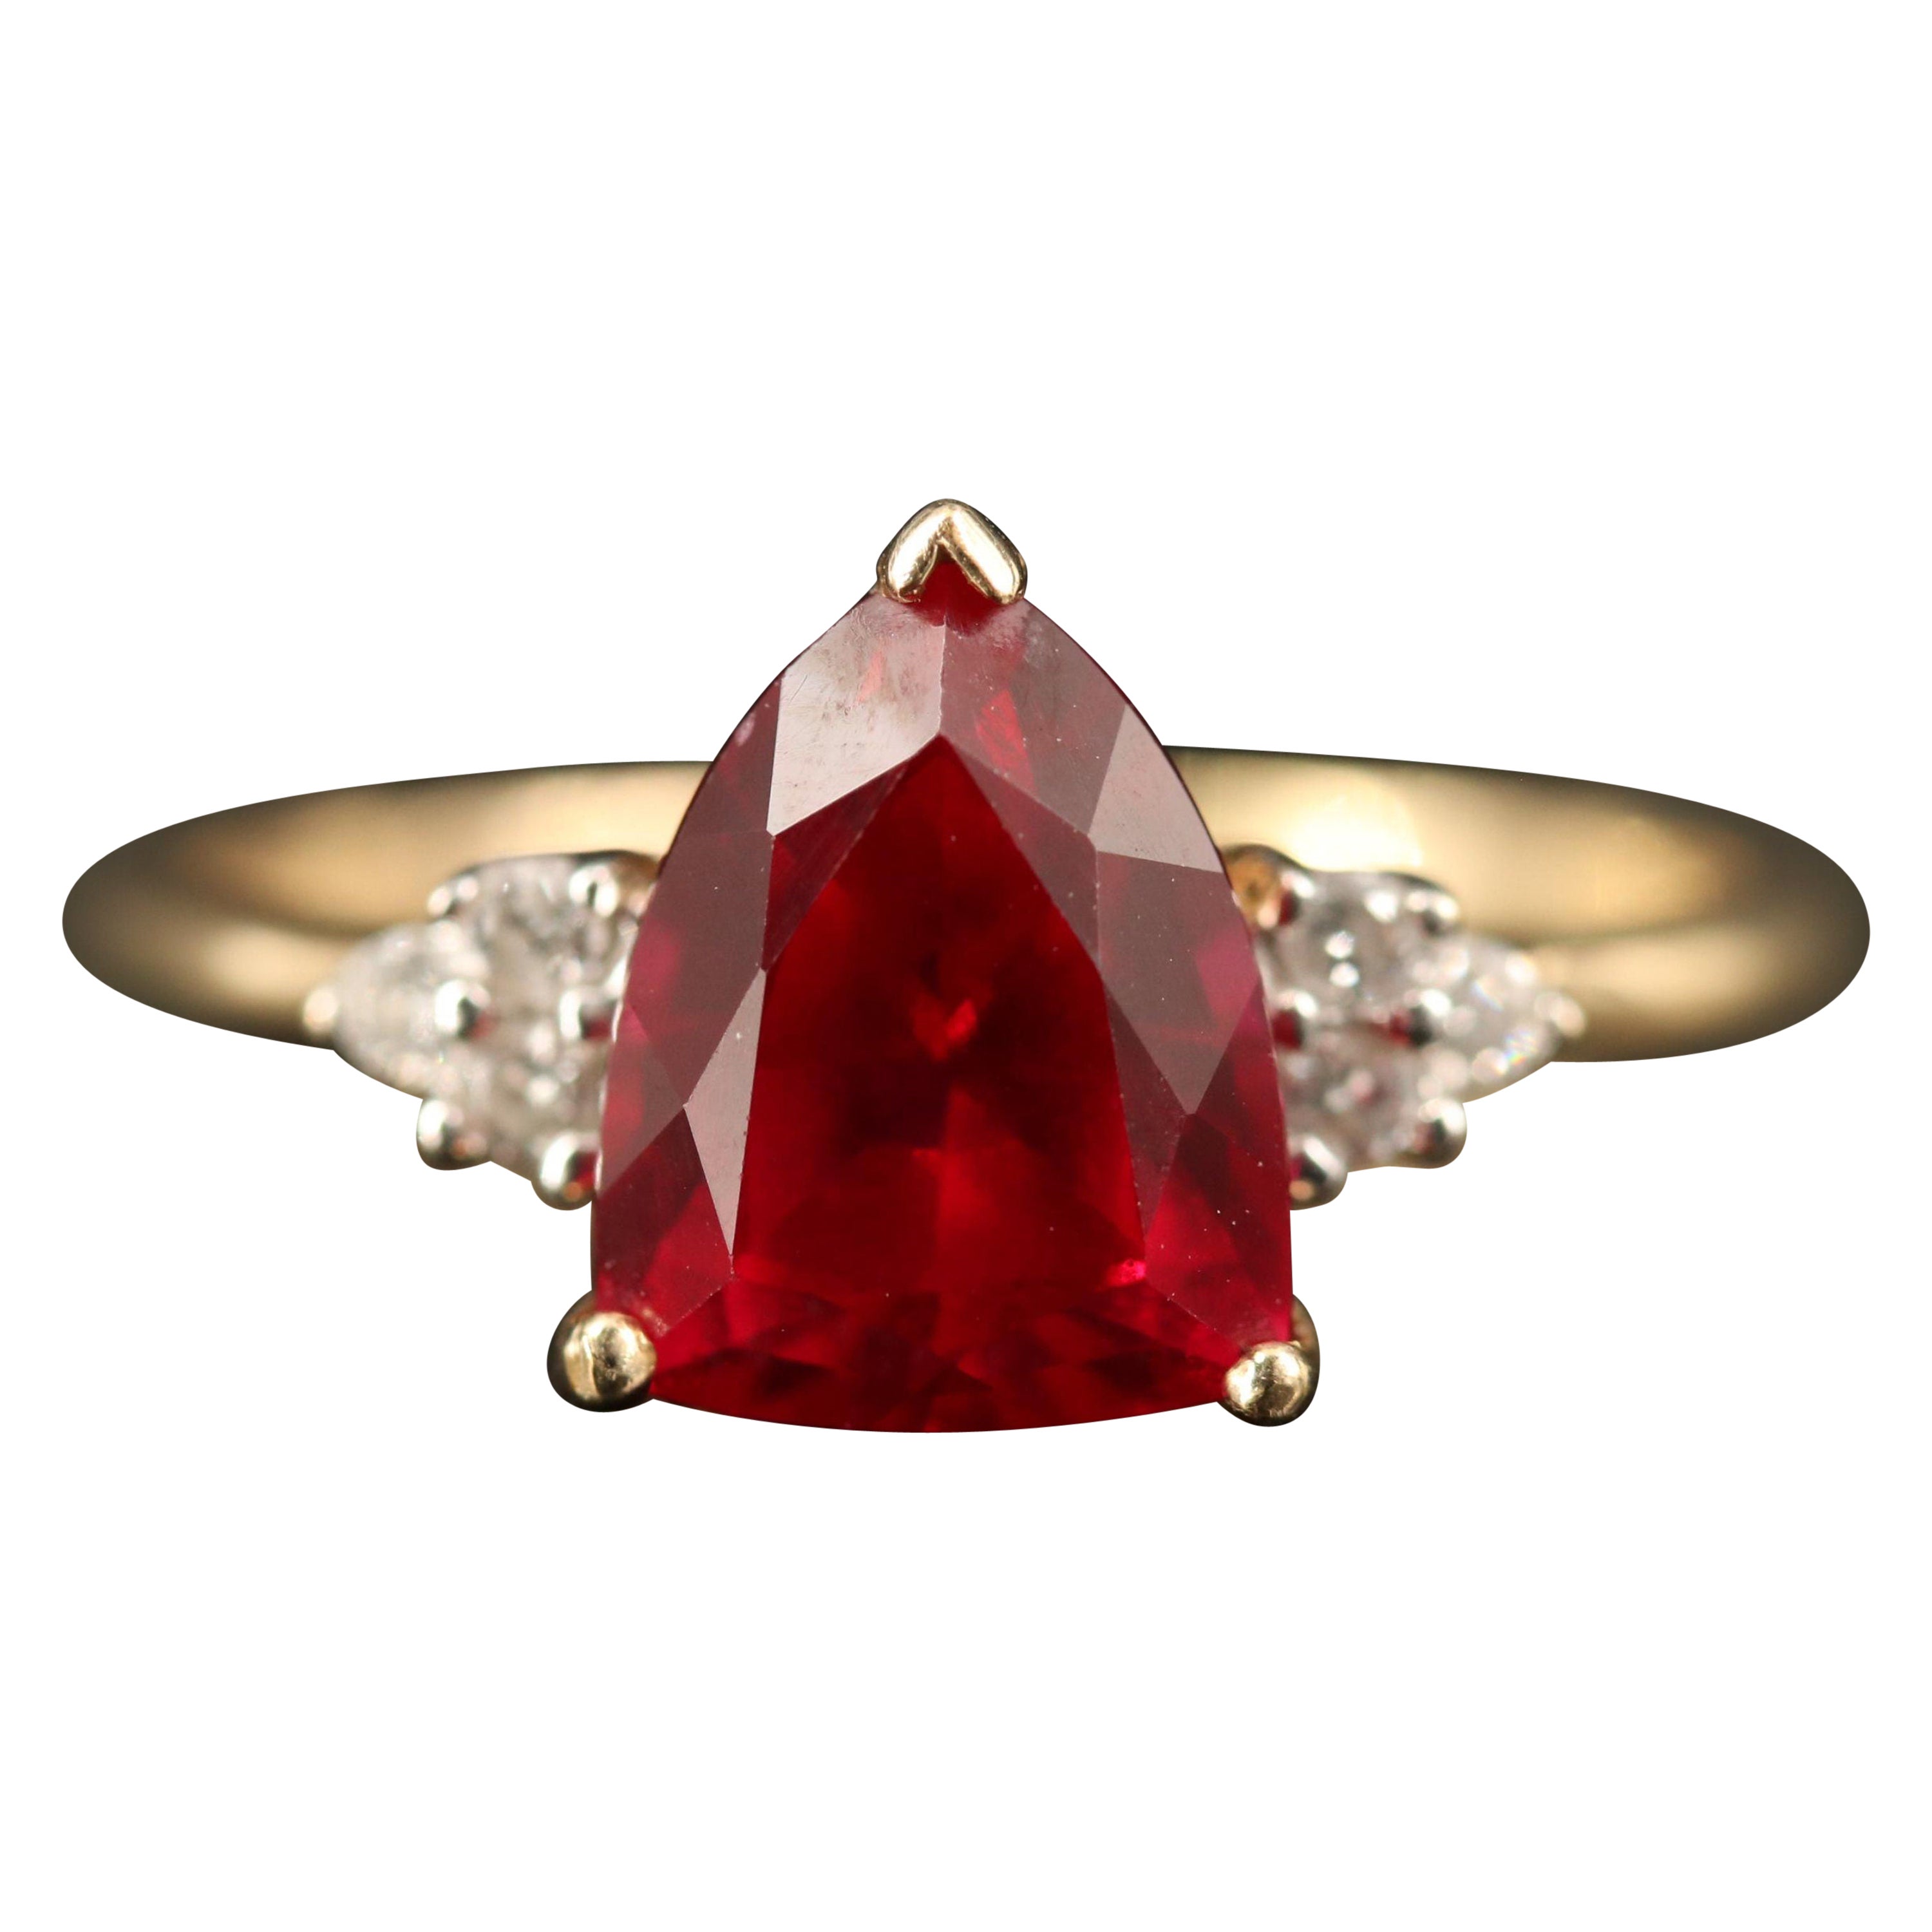 For Sale:  2 Carat Trilliant Cut Ruby Diamond Engagement Ring Antique Victorian Ruby Ring